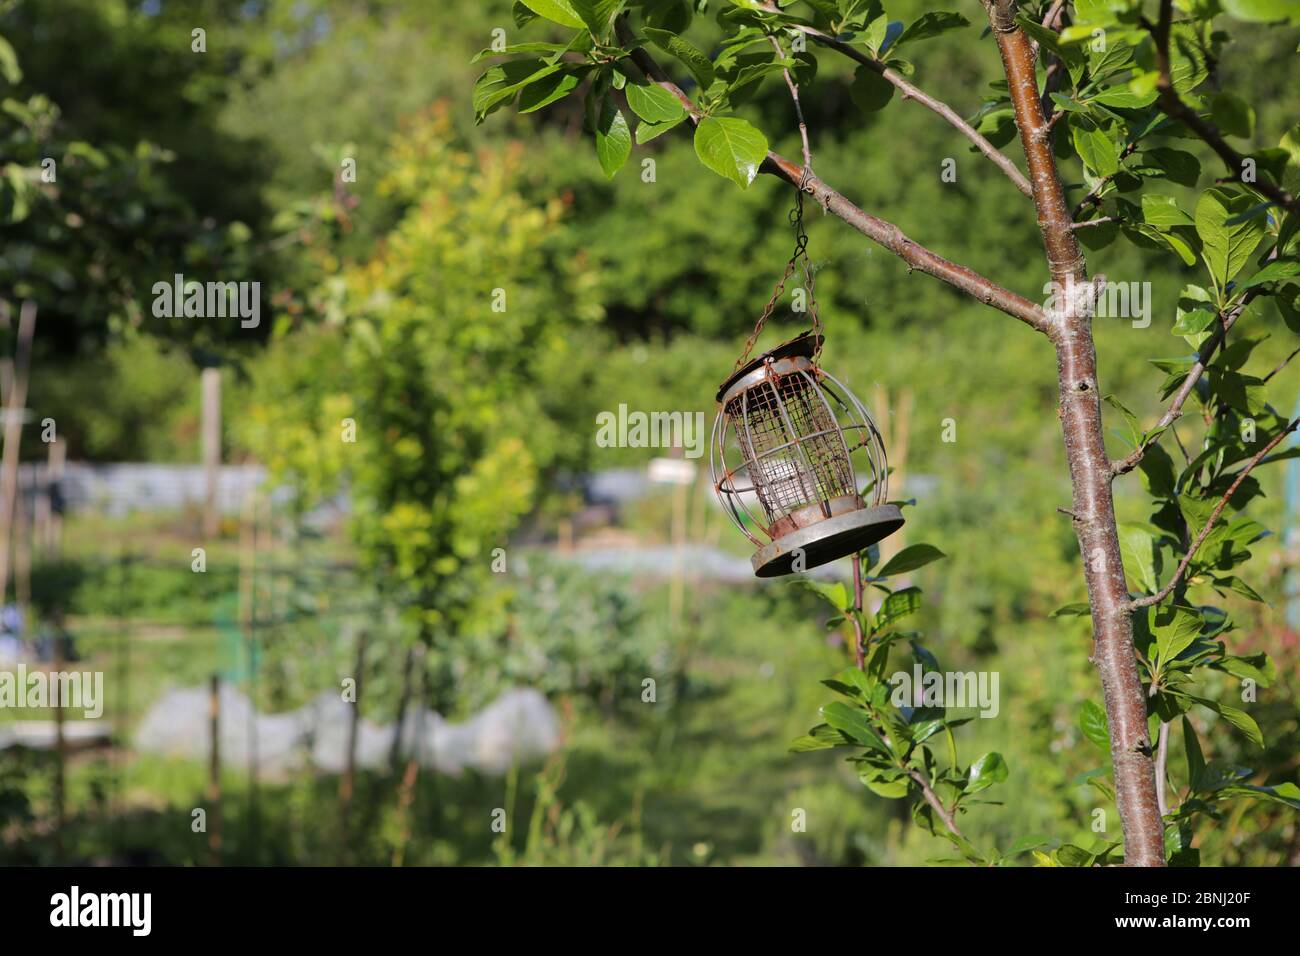 Empty metal bird feeder hanging from a tree branch Stock Photo